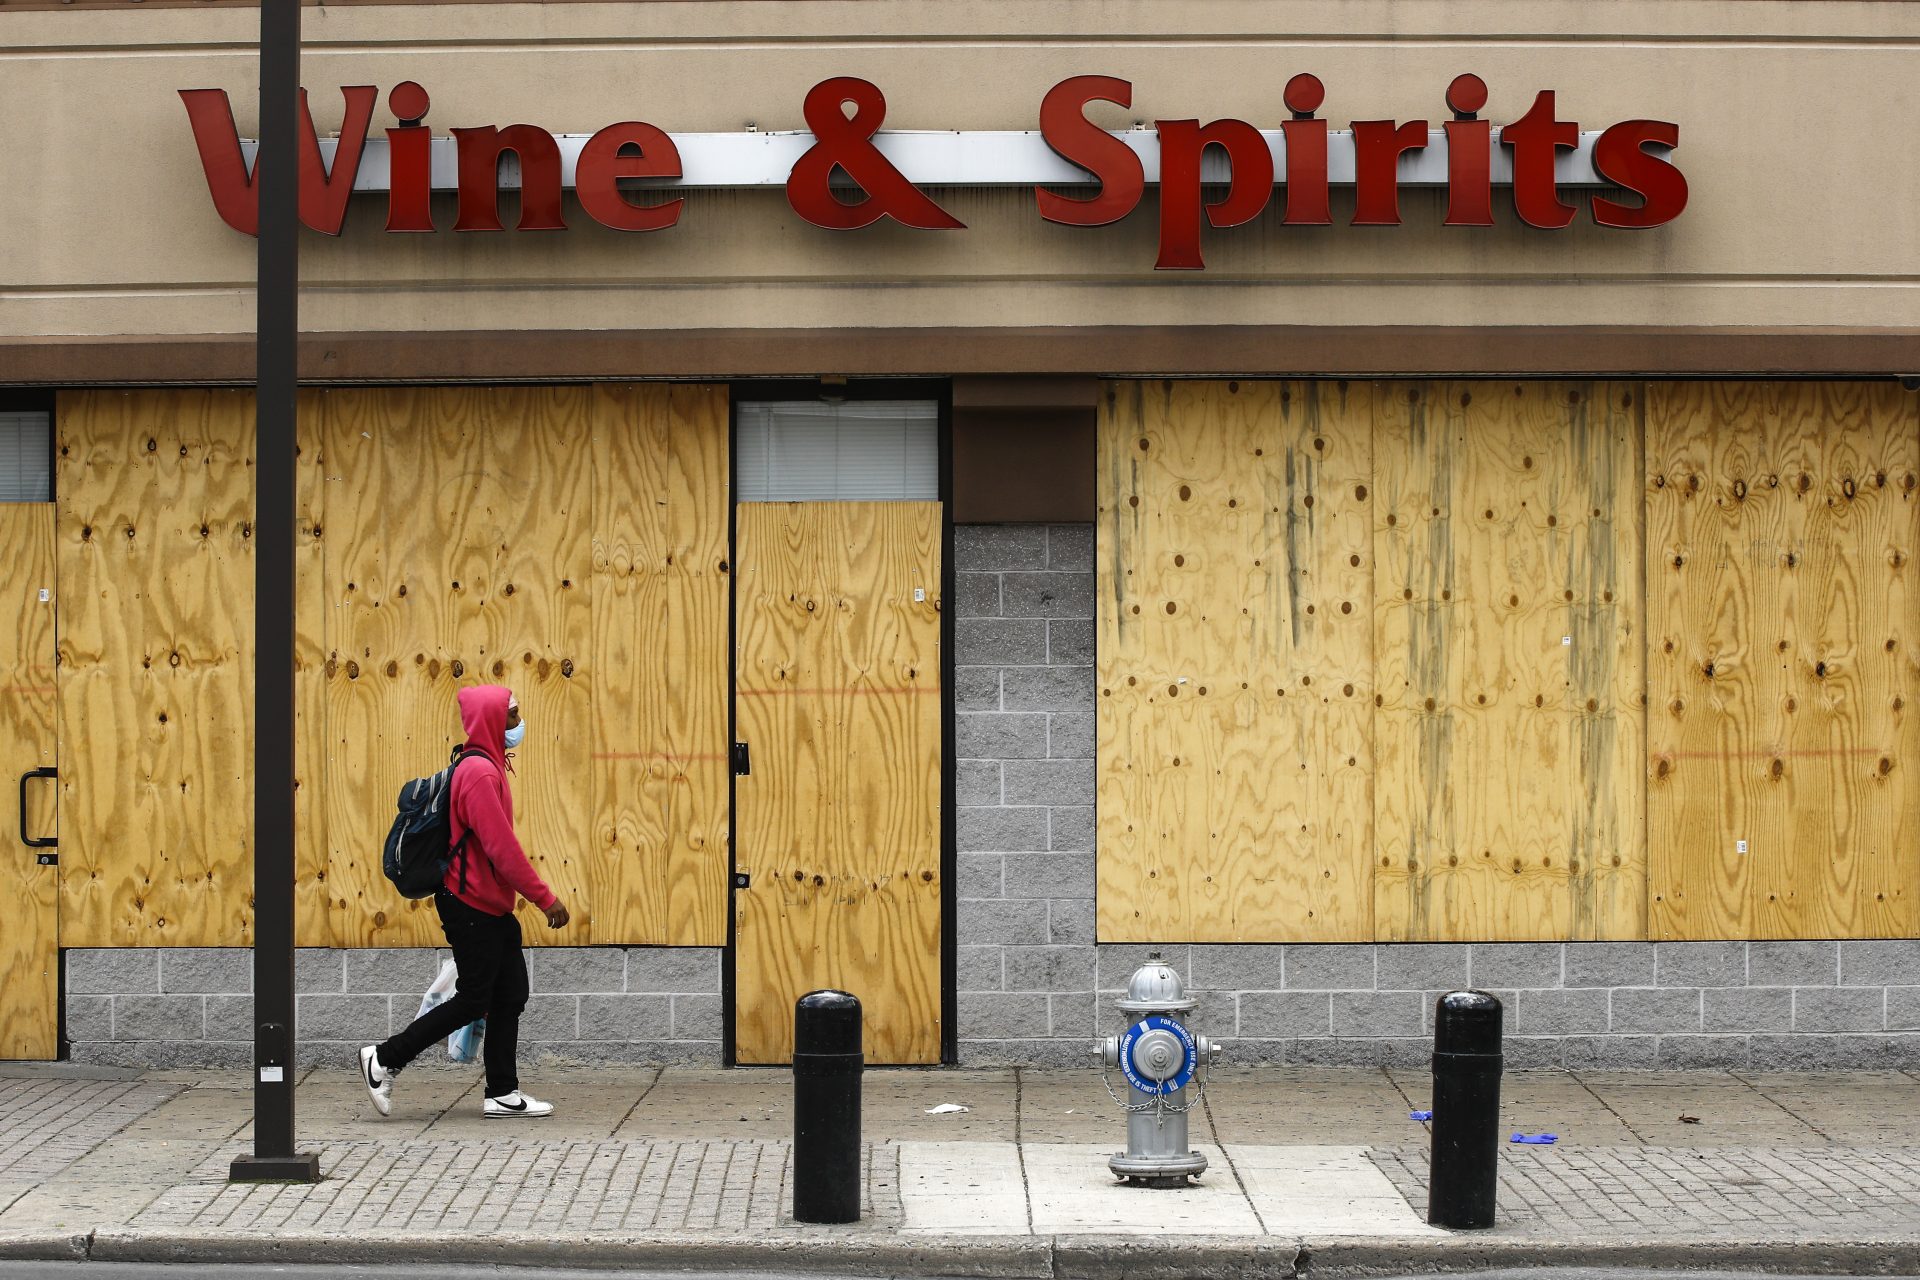 A person wearing a protective face mask as a precaution against the coronavirus walks past a boarded up Wine and Spirits store in Philadelphia, Thursday, April 16, 2020. Pennsylvania's liquor agency says workers are coming back on the job at more than 100 shuttered state-owned liquor stores to help process online orders.